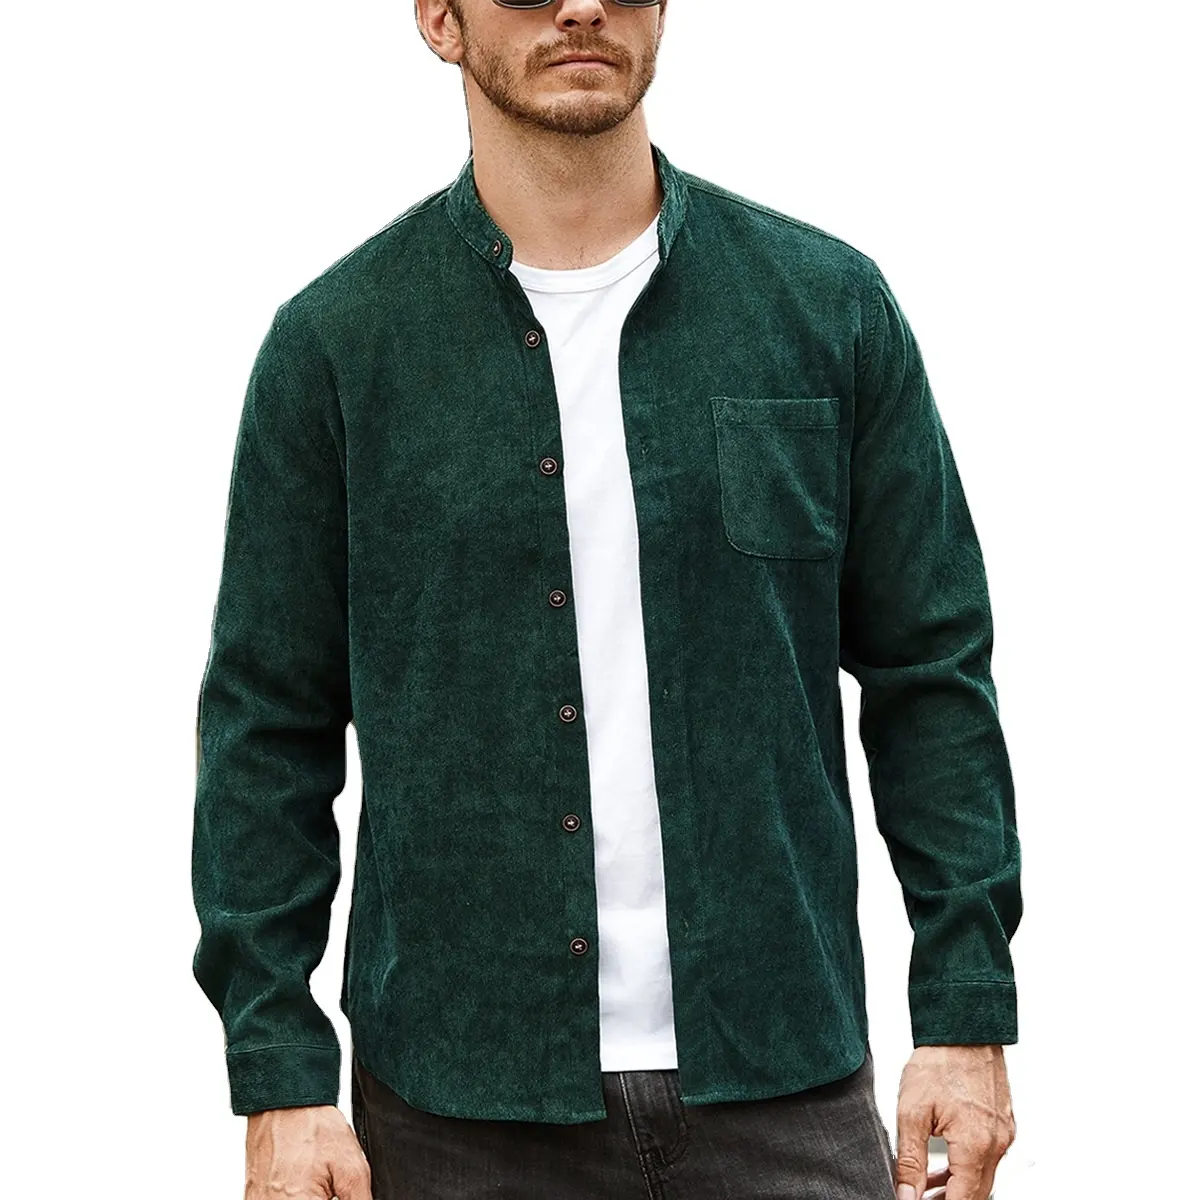 Stylish Retro Buttons Anti Wrinkle Sublimation Blank Army Green Vintage Corduroy Full Sleeve Shirt Mens